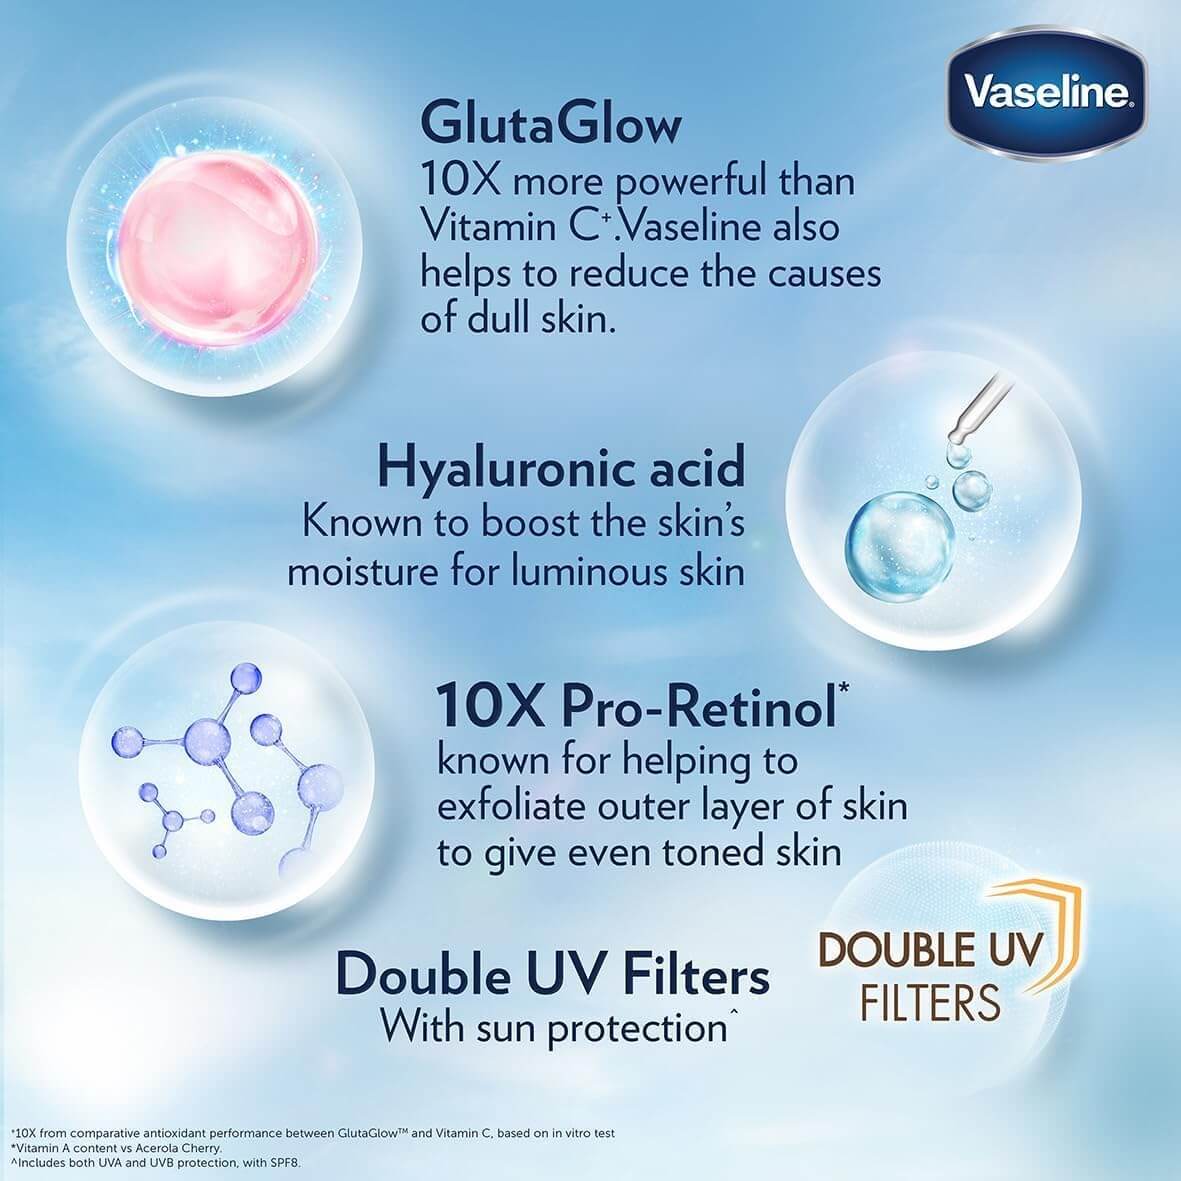 image showing benefits of using vaseline gluta hya hyaluronic acid lotion for skin brightening available at Heygirl.pk for delivery in Pakistan